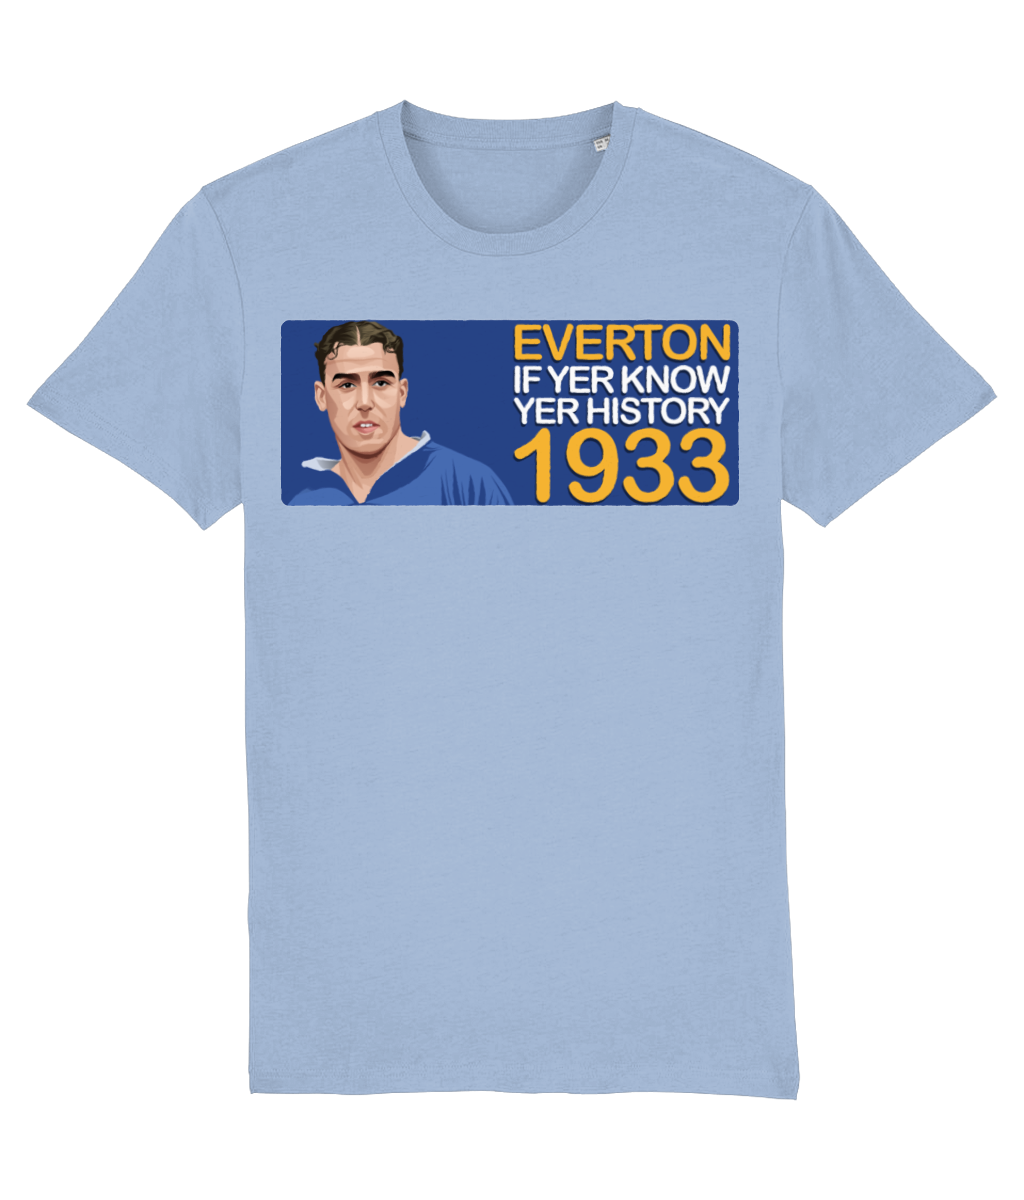 Everton 1933 Dixie Dean If Yer Know Yer History Unisex T-Shirt